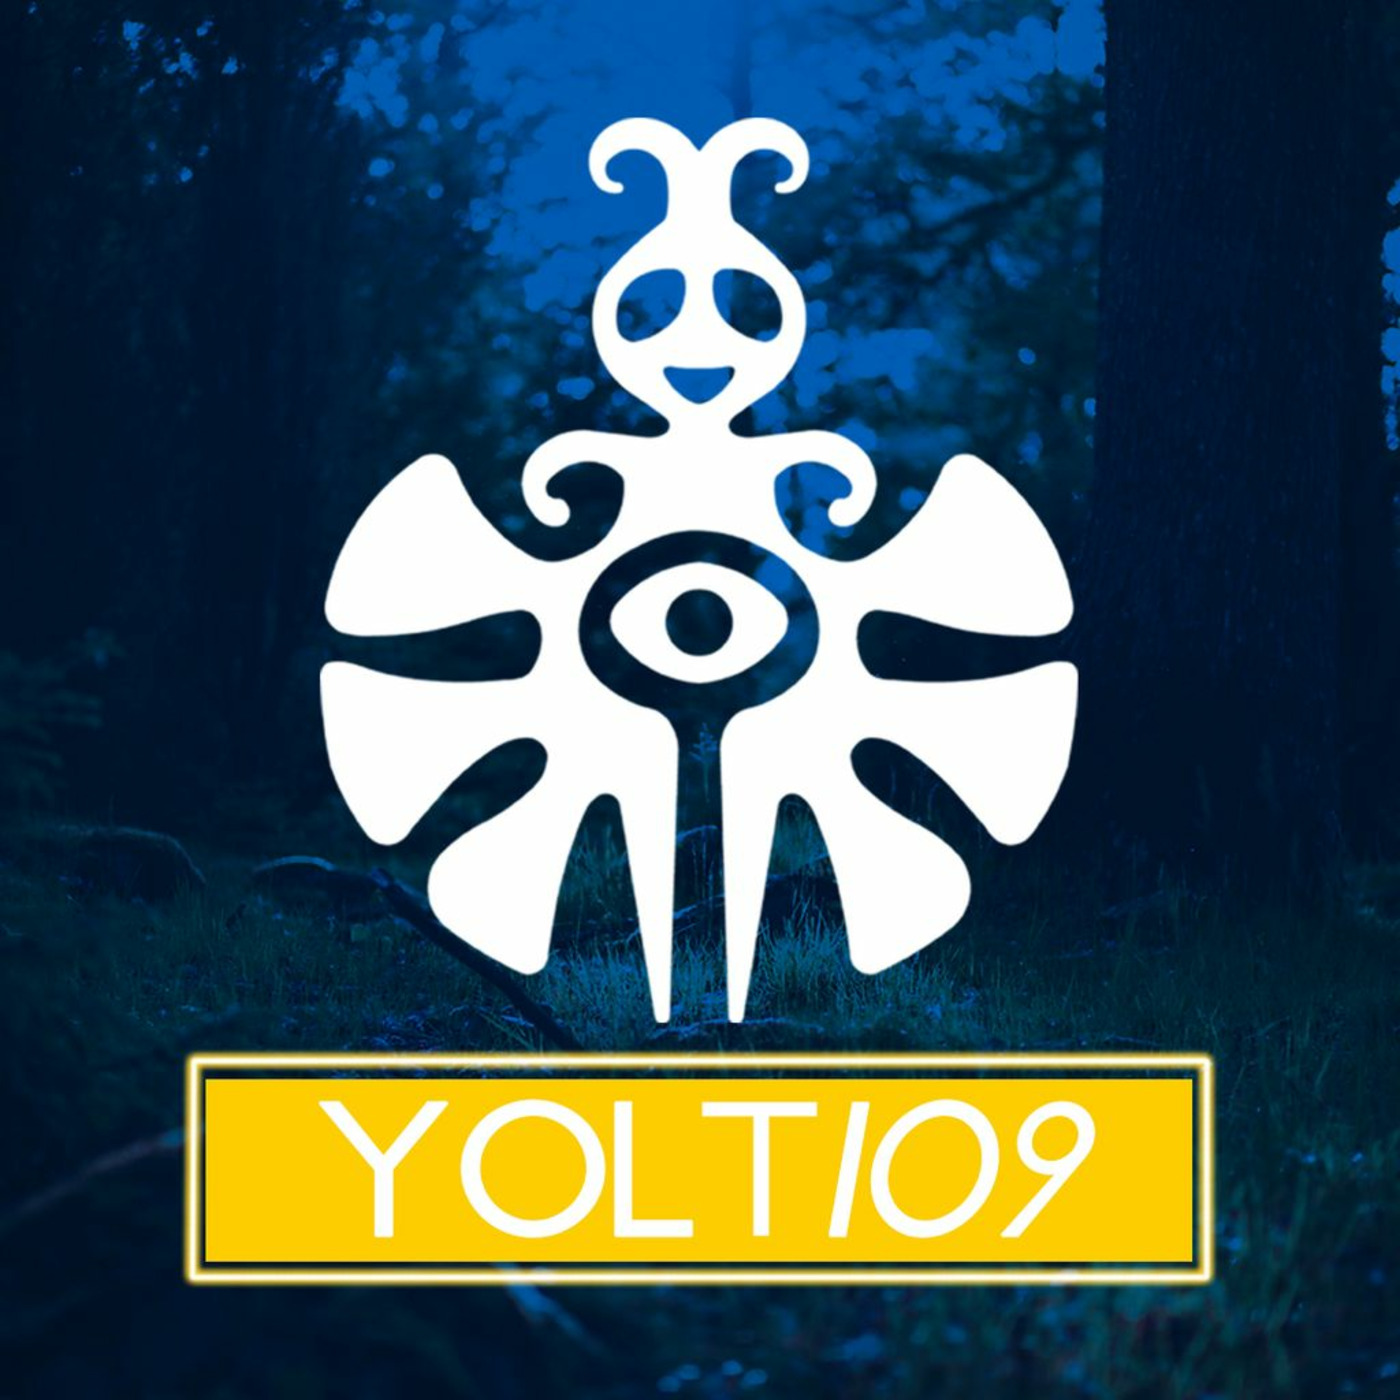 You Only Live Trance Episode 109 (#YOLT109) - Ness